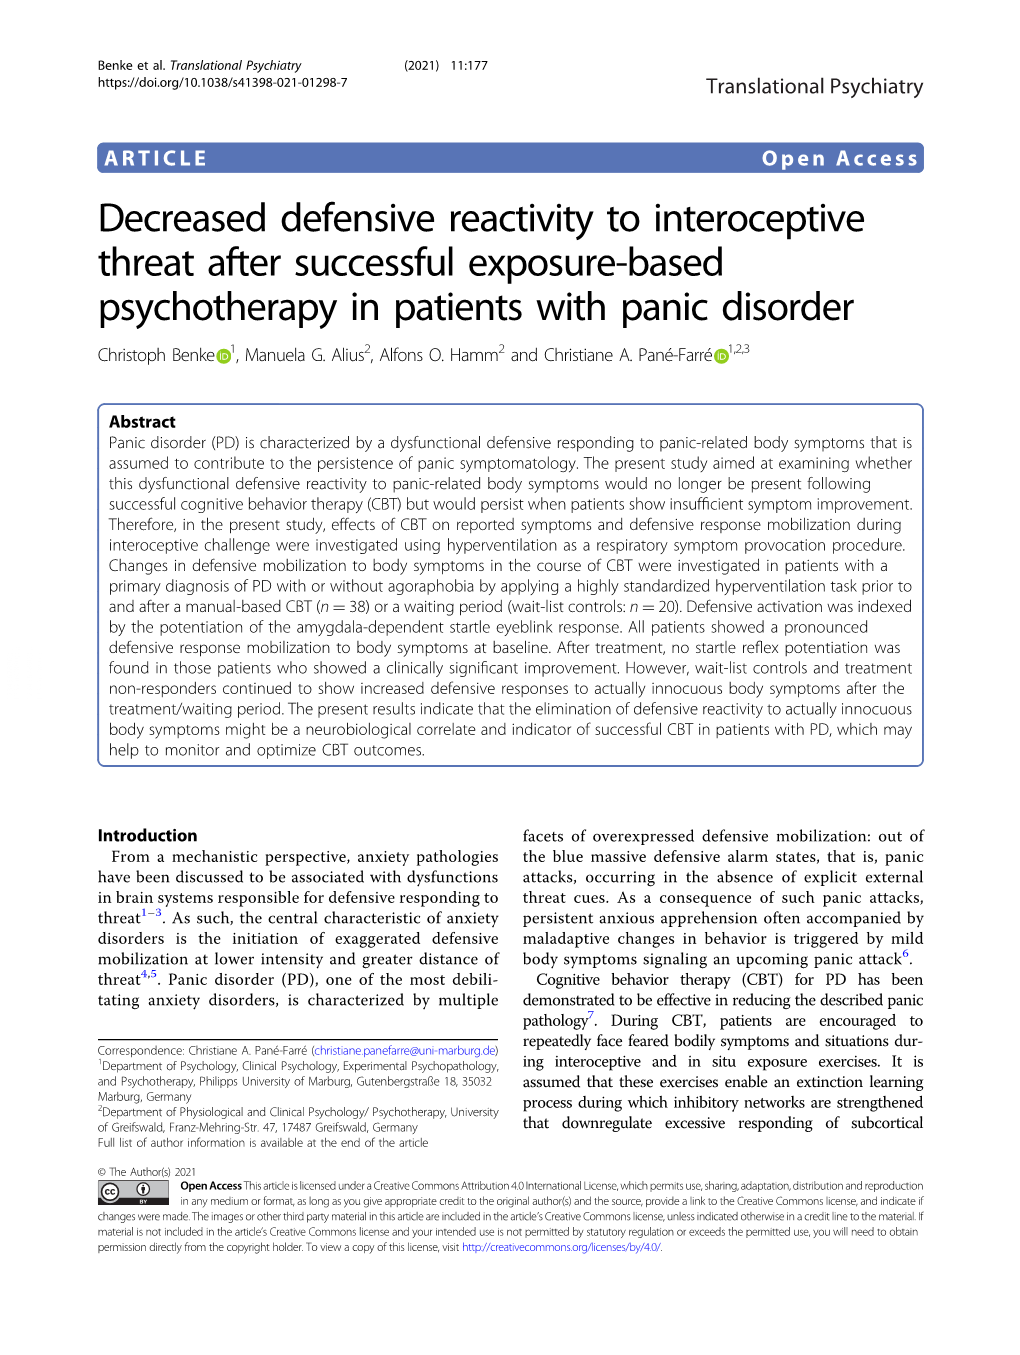 Decreased Defensive Reactivity to Interoceptive Threat After Successful Exposure-Based Psychotherapy in Patients with Panic Disorder Christoph Benke 1, Manuela G